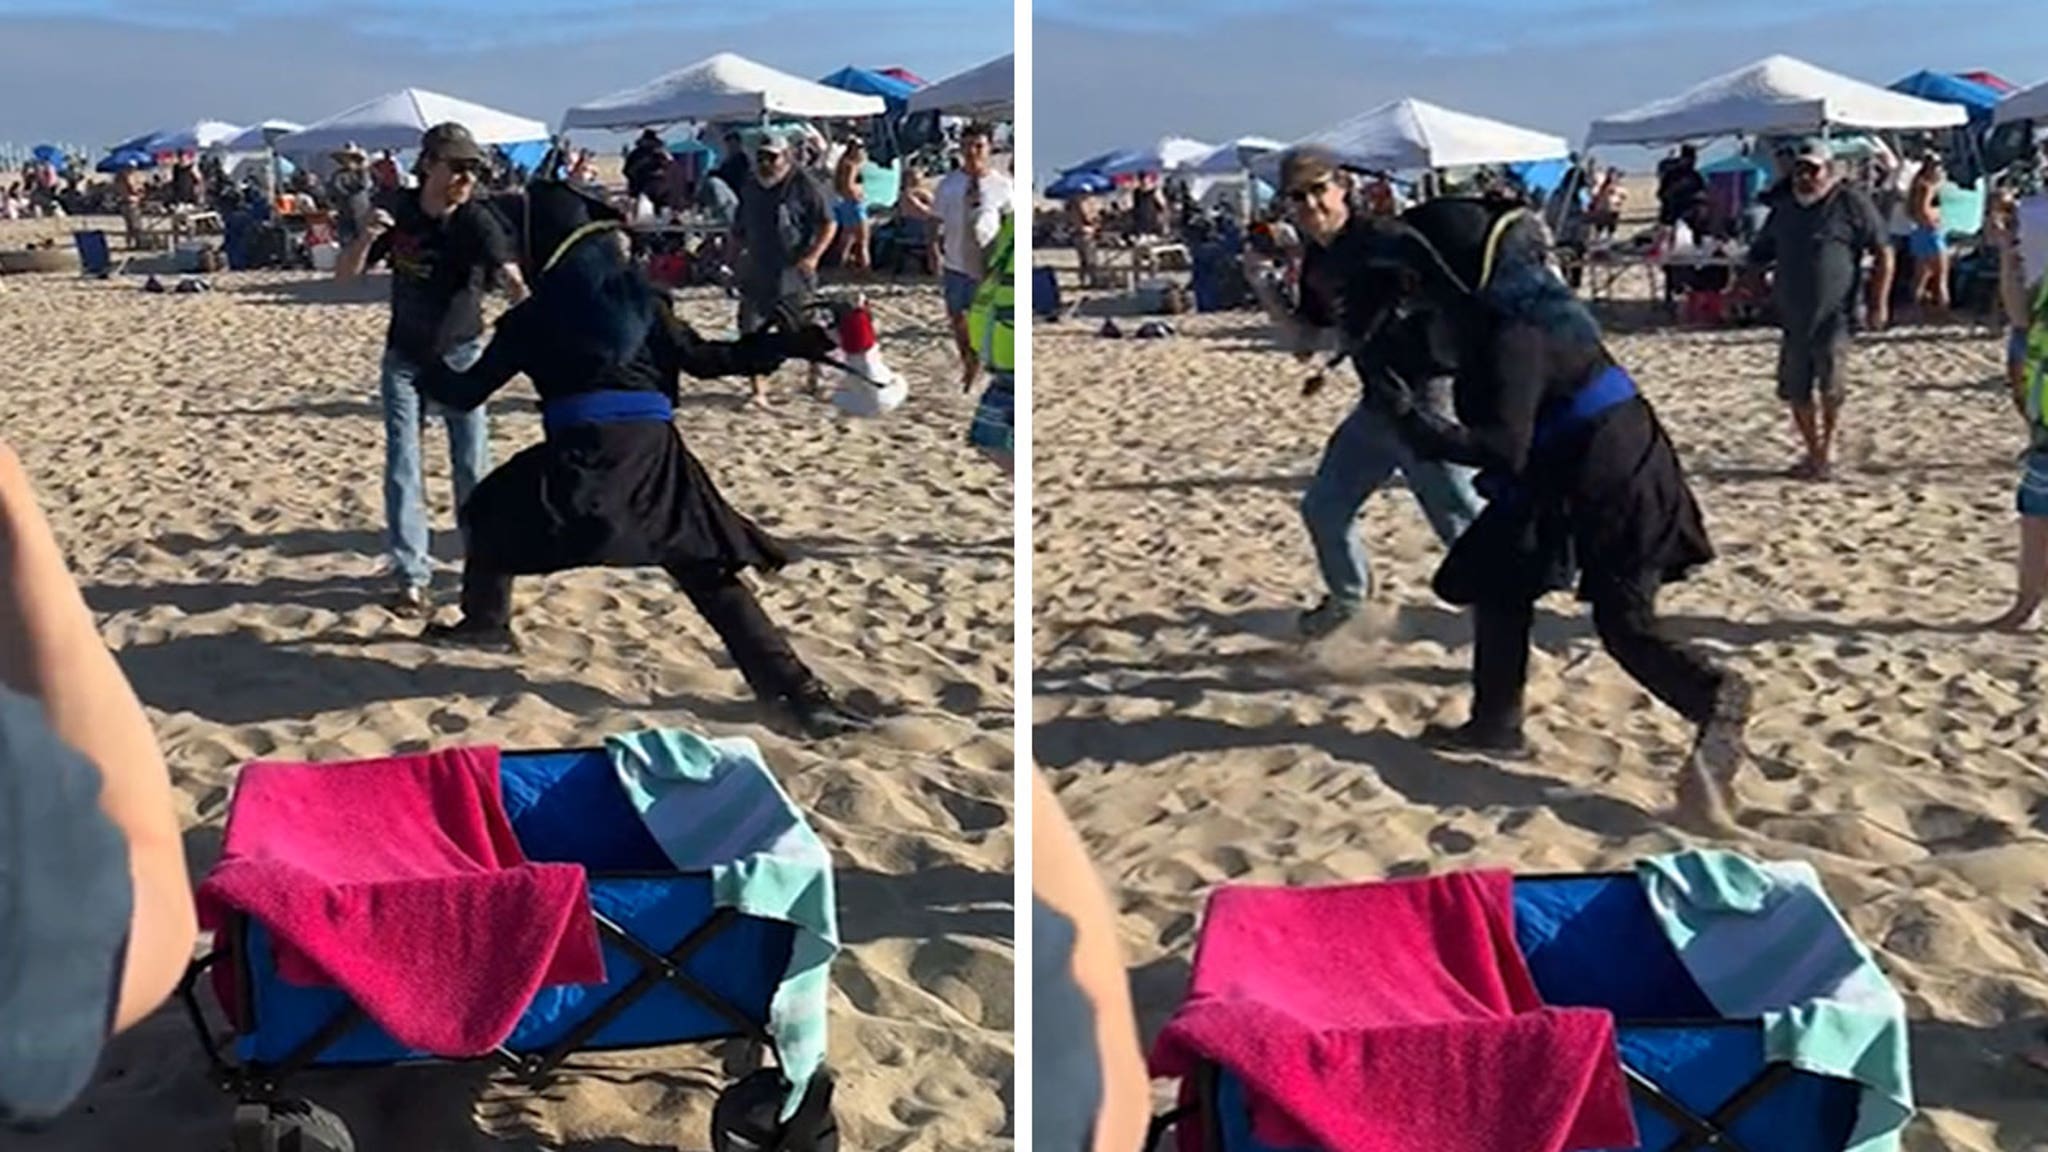 Man Attacked By Furry At Huntington Beach Meetup, Wild Video Shows picture